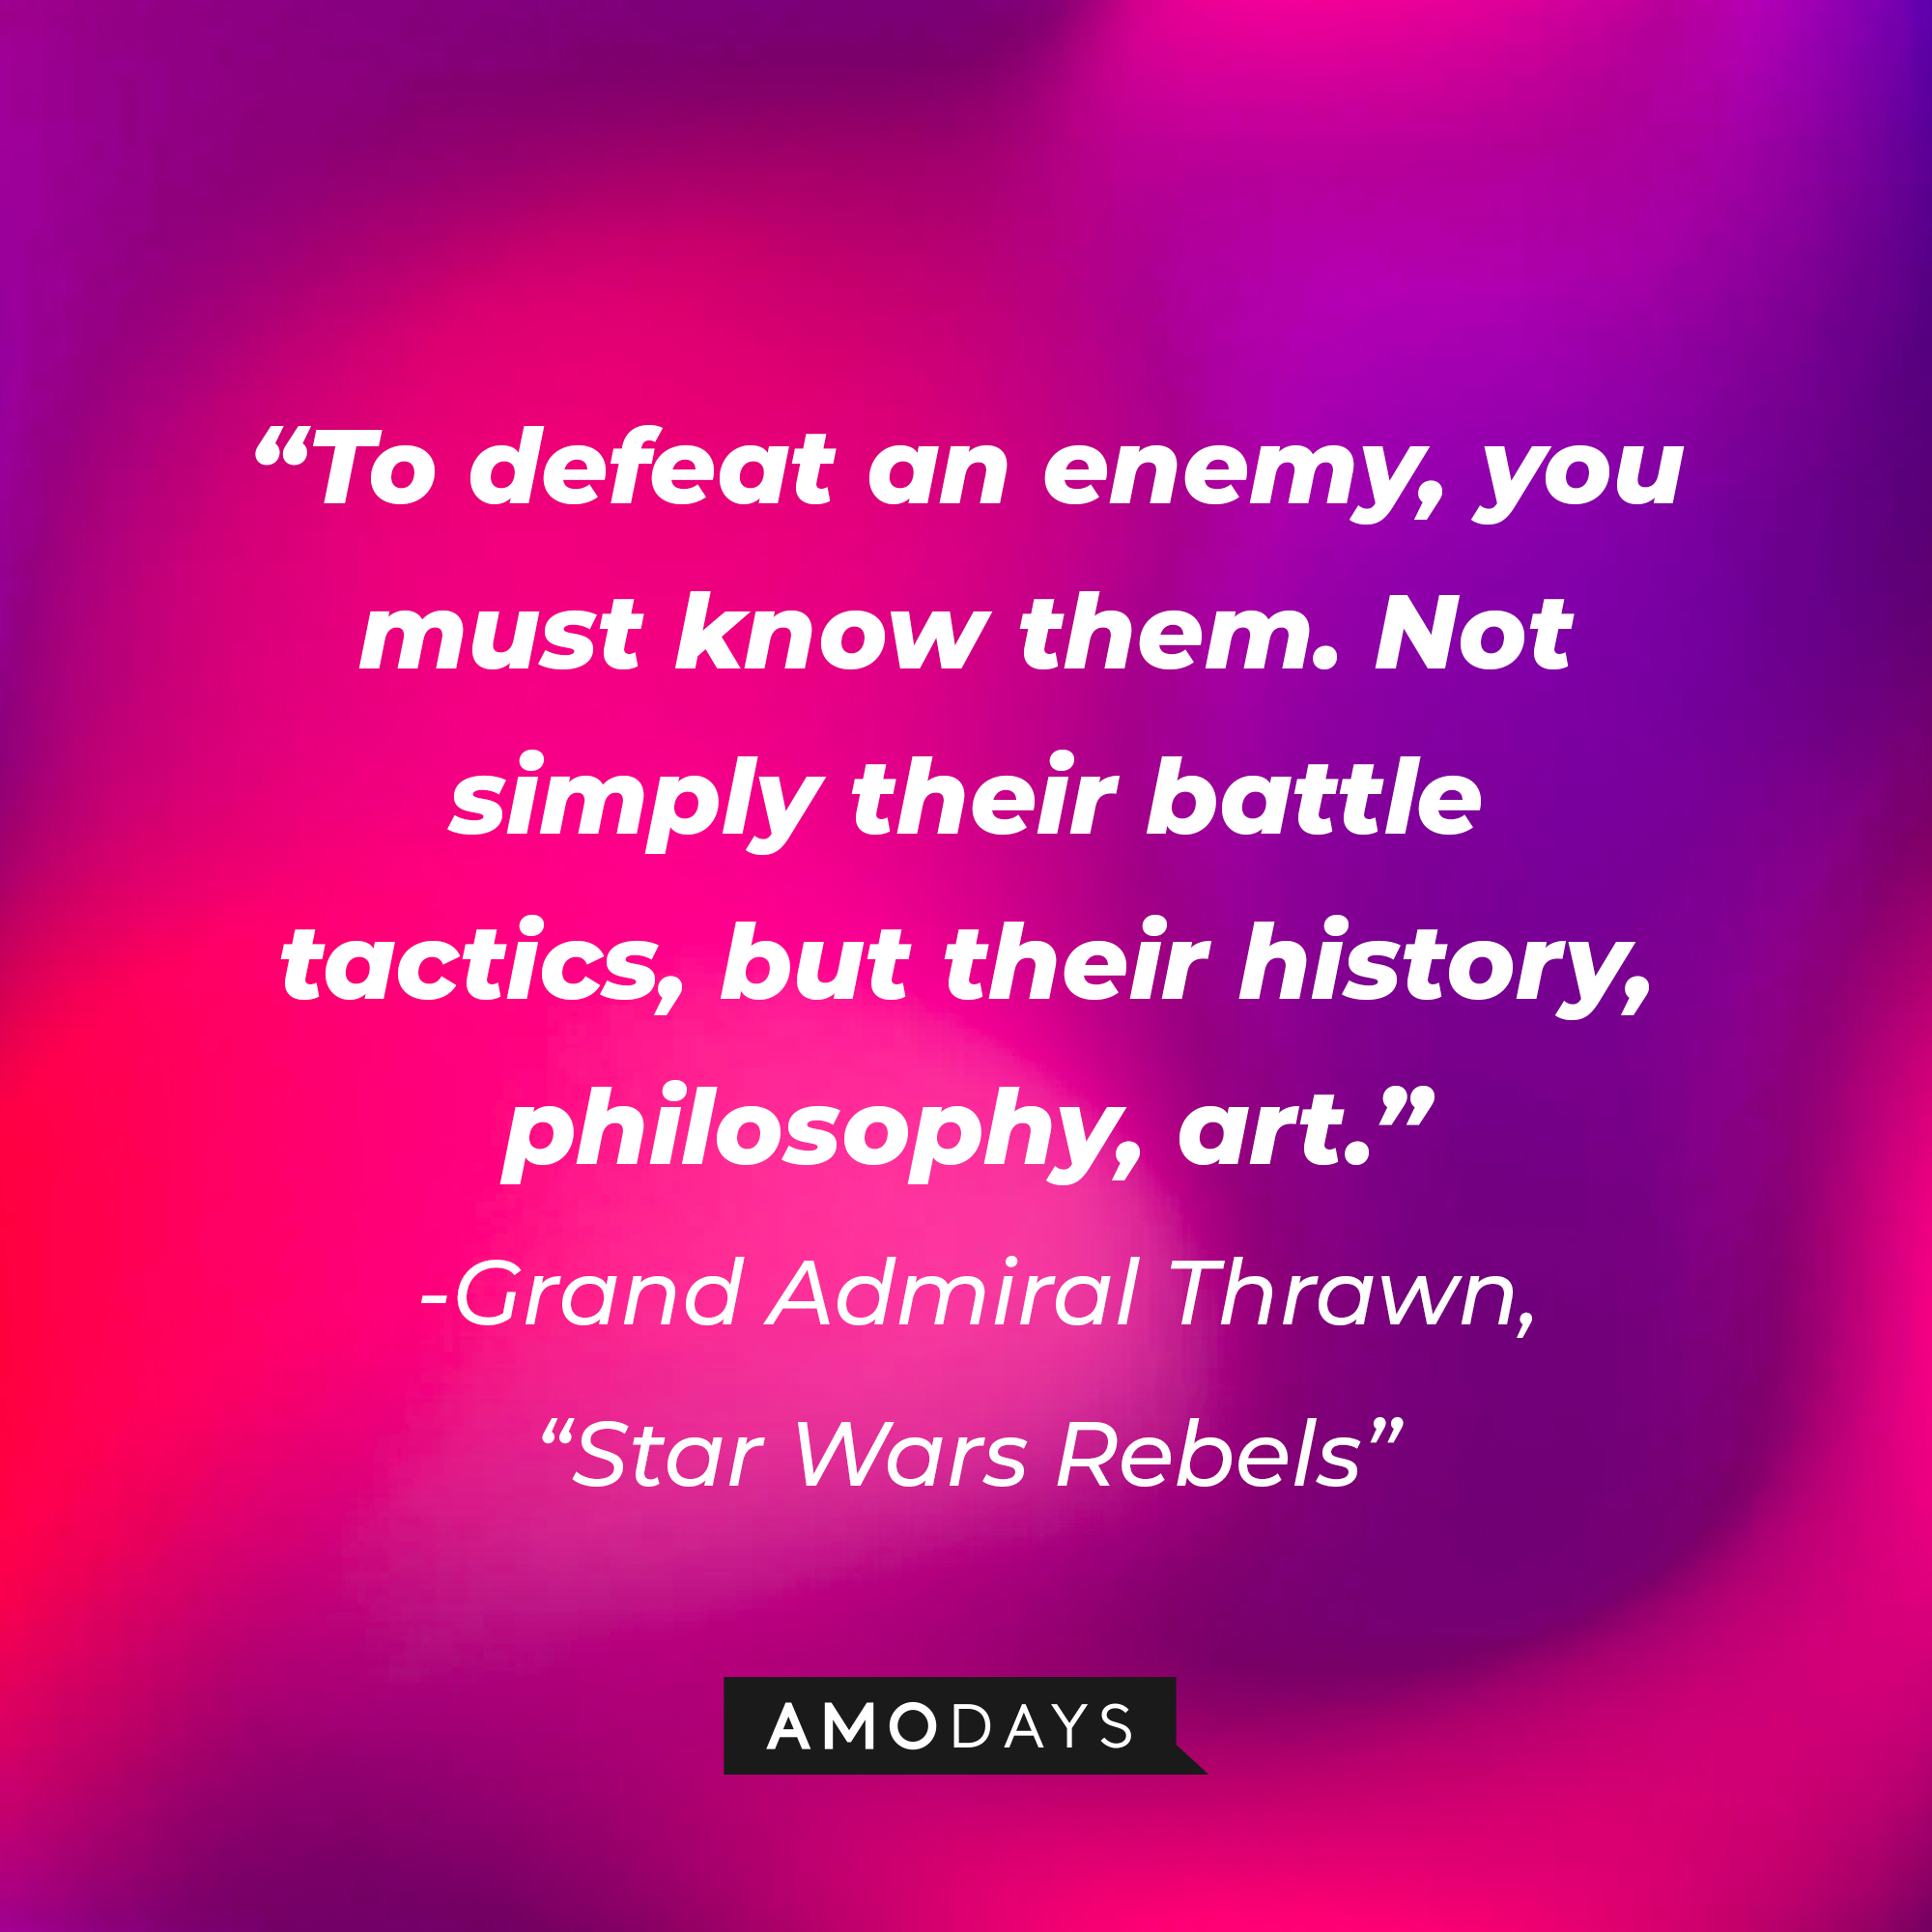 Grand Admiral Thrawn's quote: "To defeat an enemy, you must know them. Not simply their battle tactics, but their history, philosophy, art." | Source: AmoDays